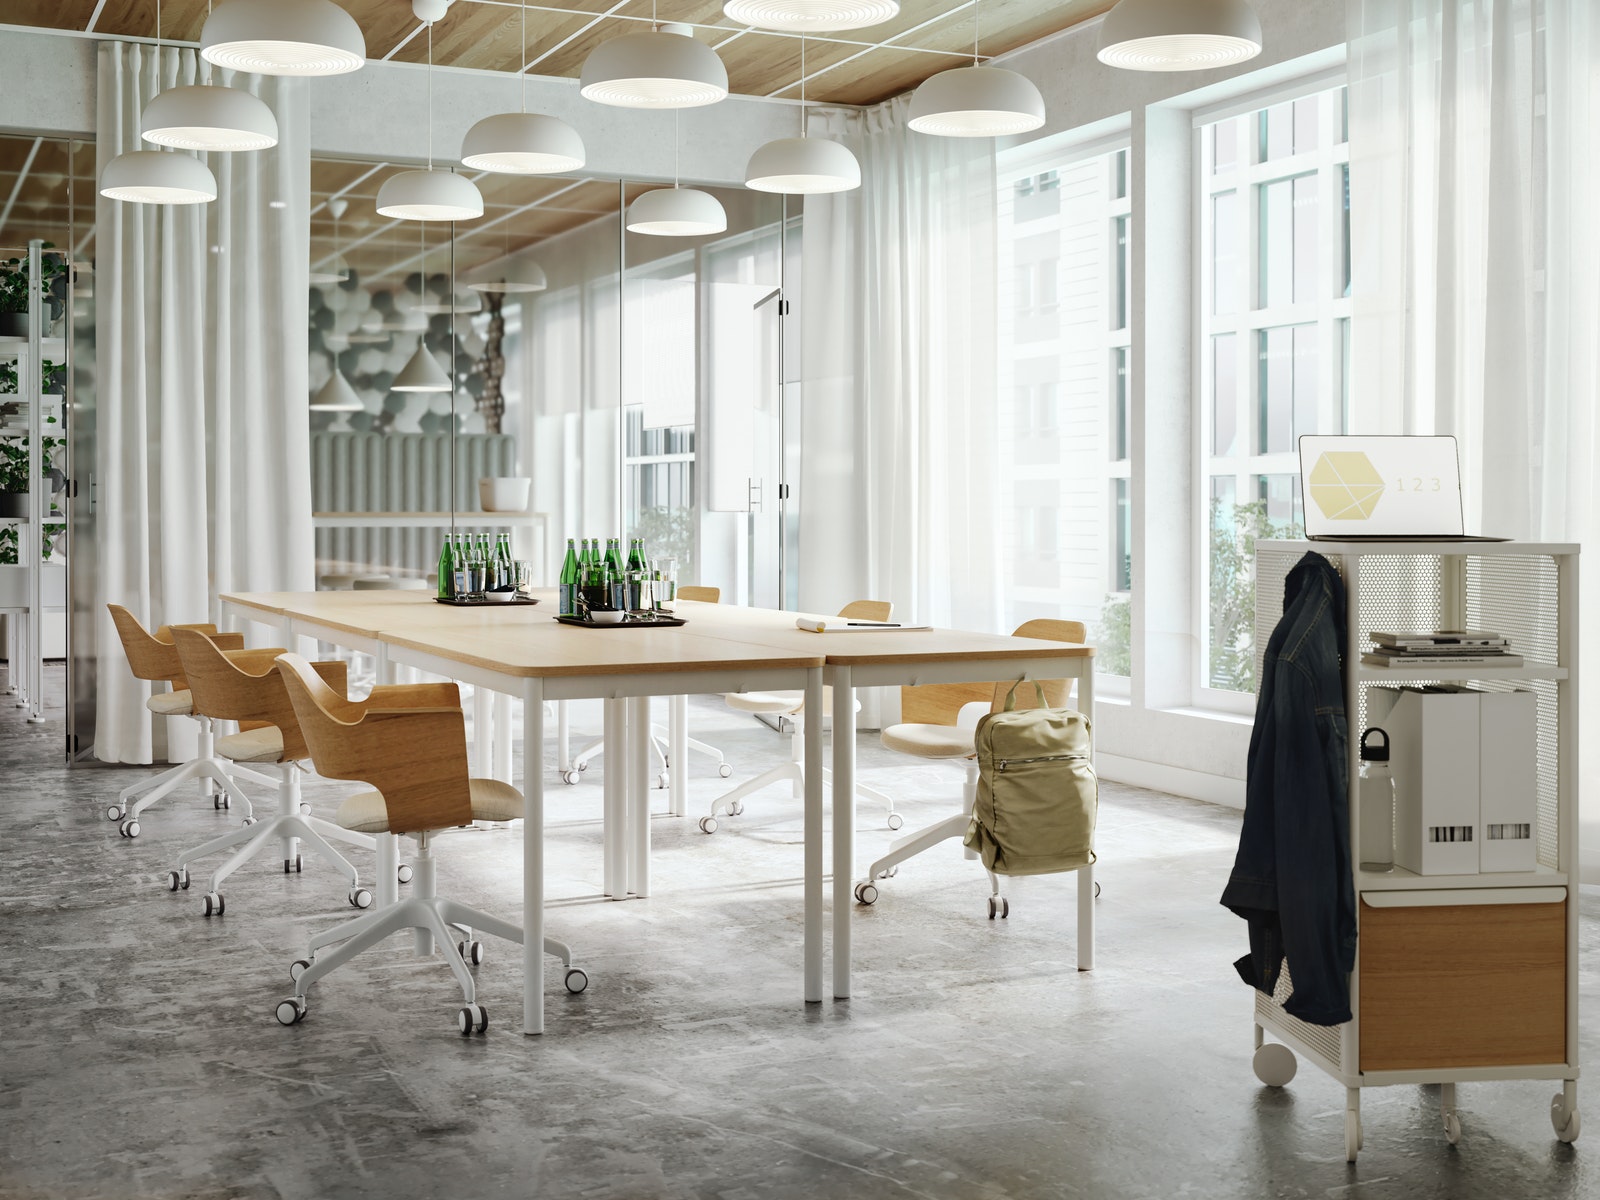 IKEA - An engaging and collaborative office for creative ideas